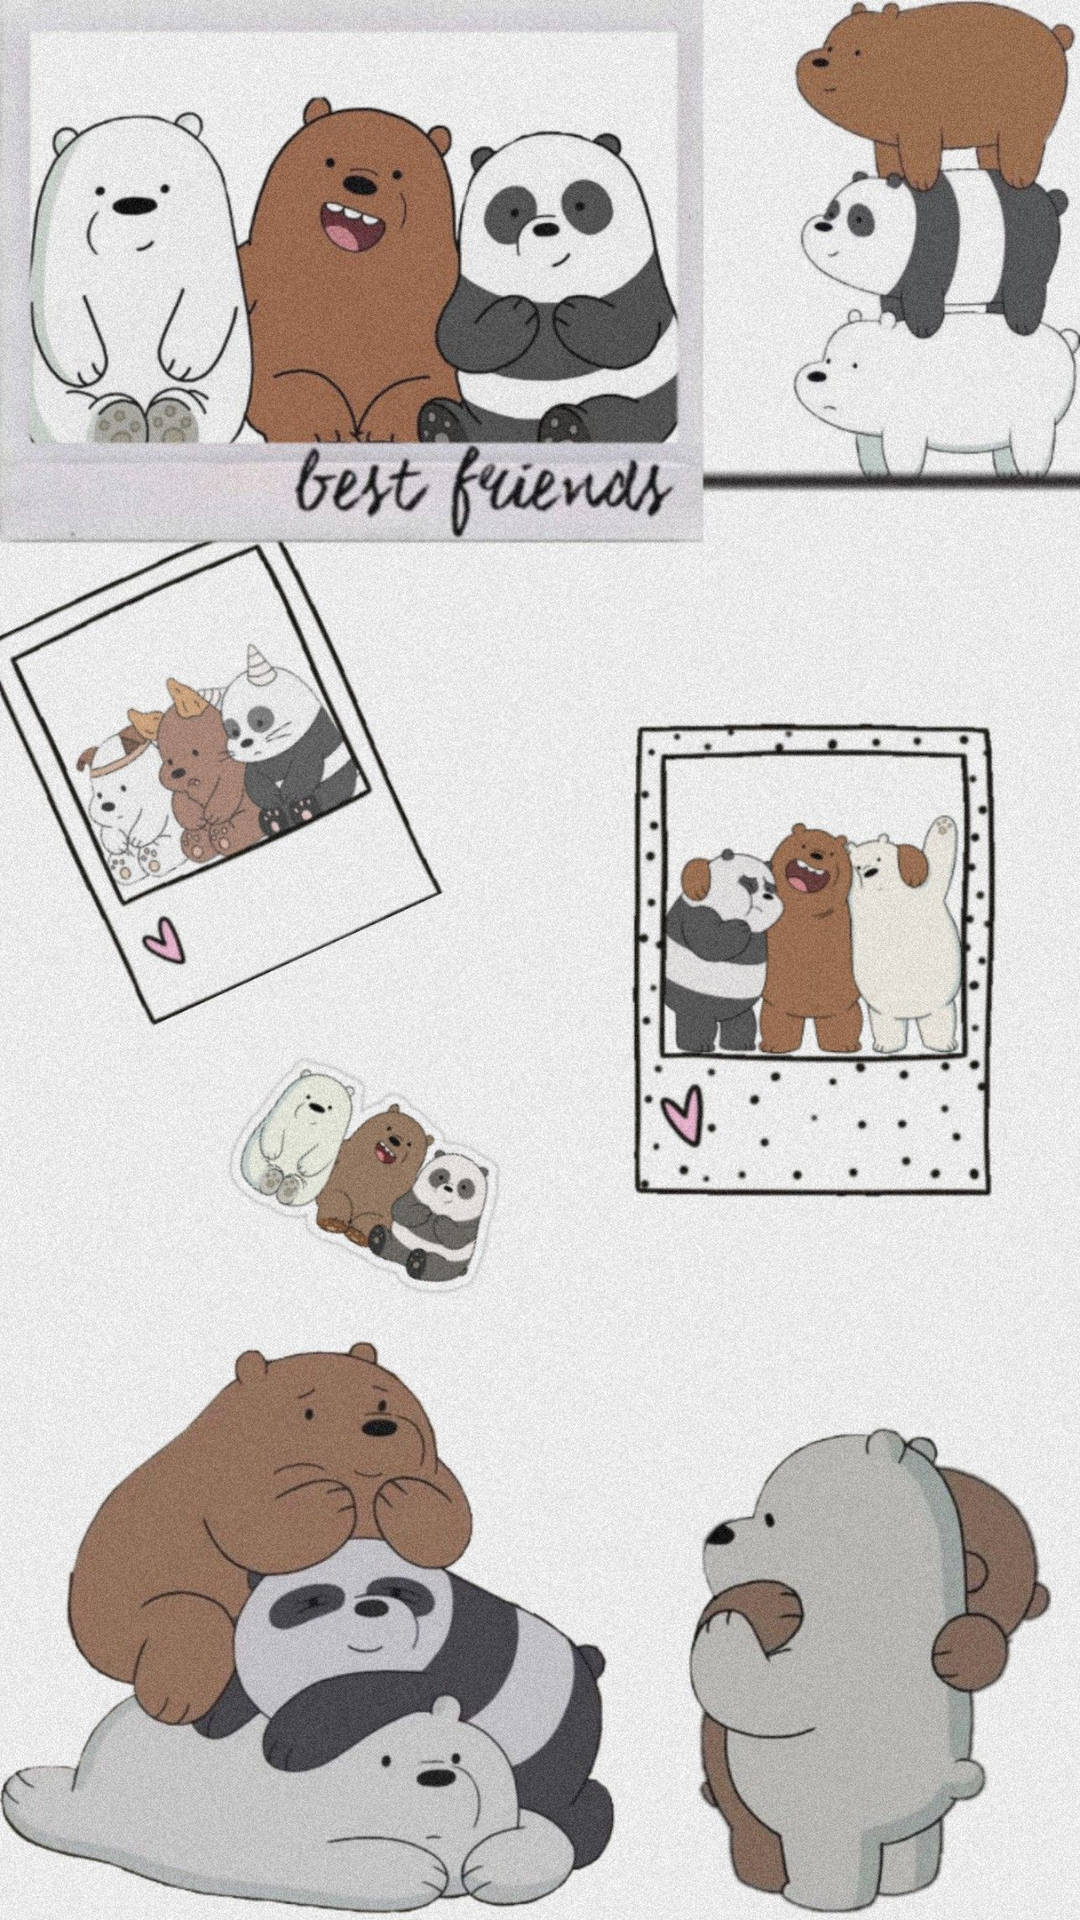 A collection of pictures that are all about bears - We Bare Bears